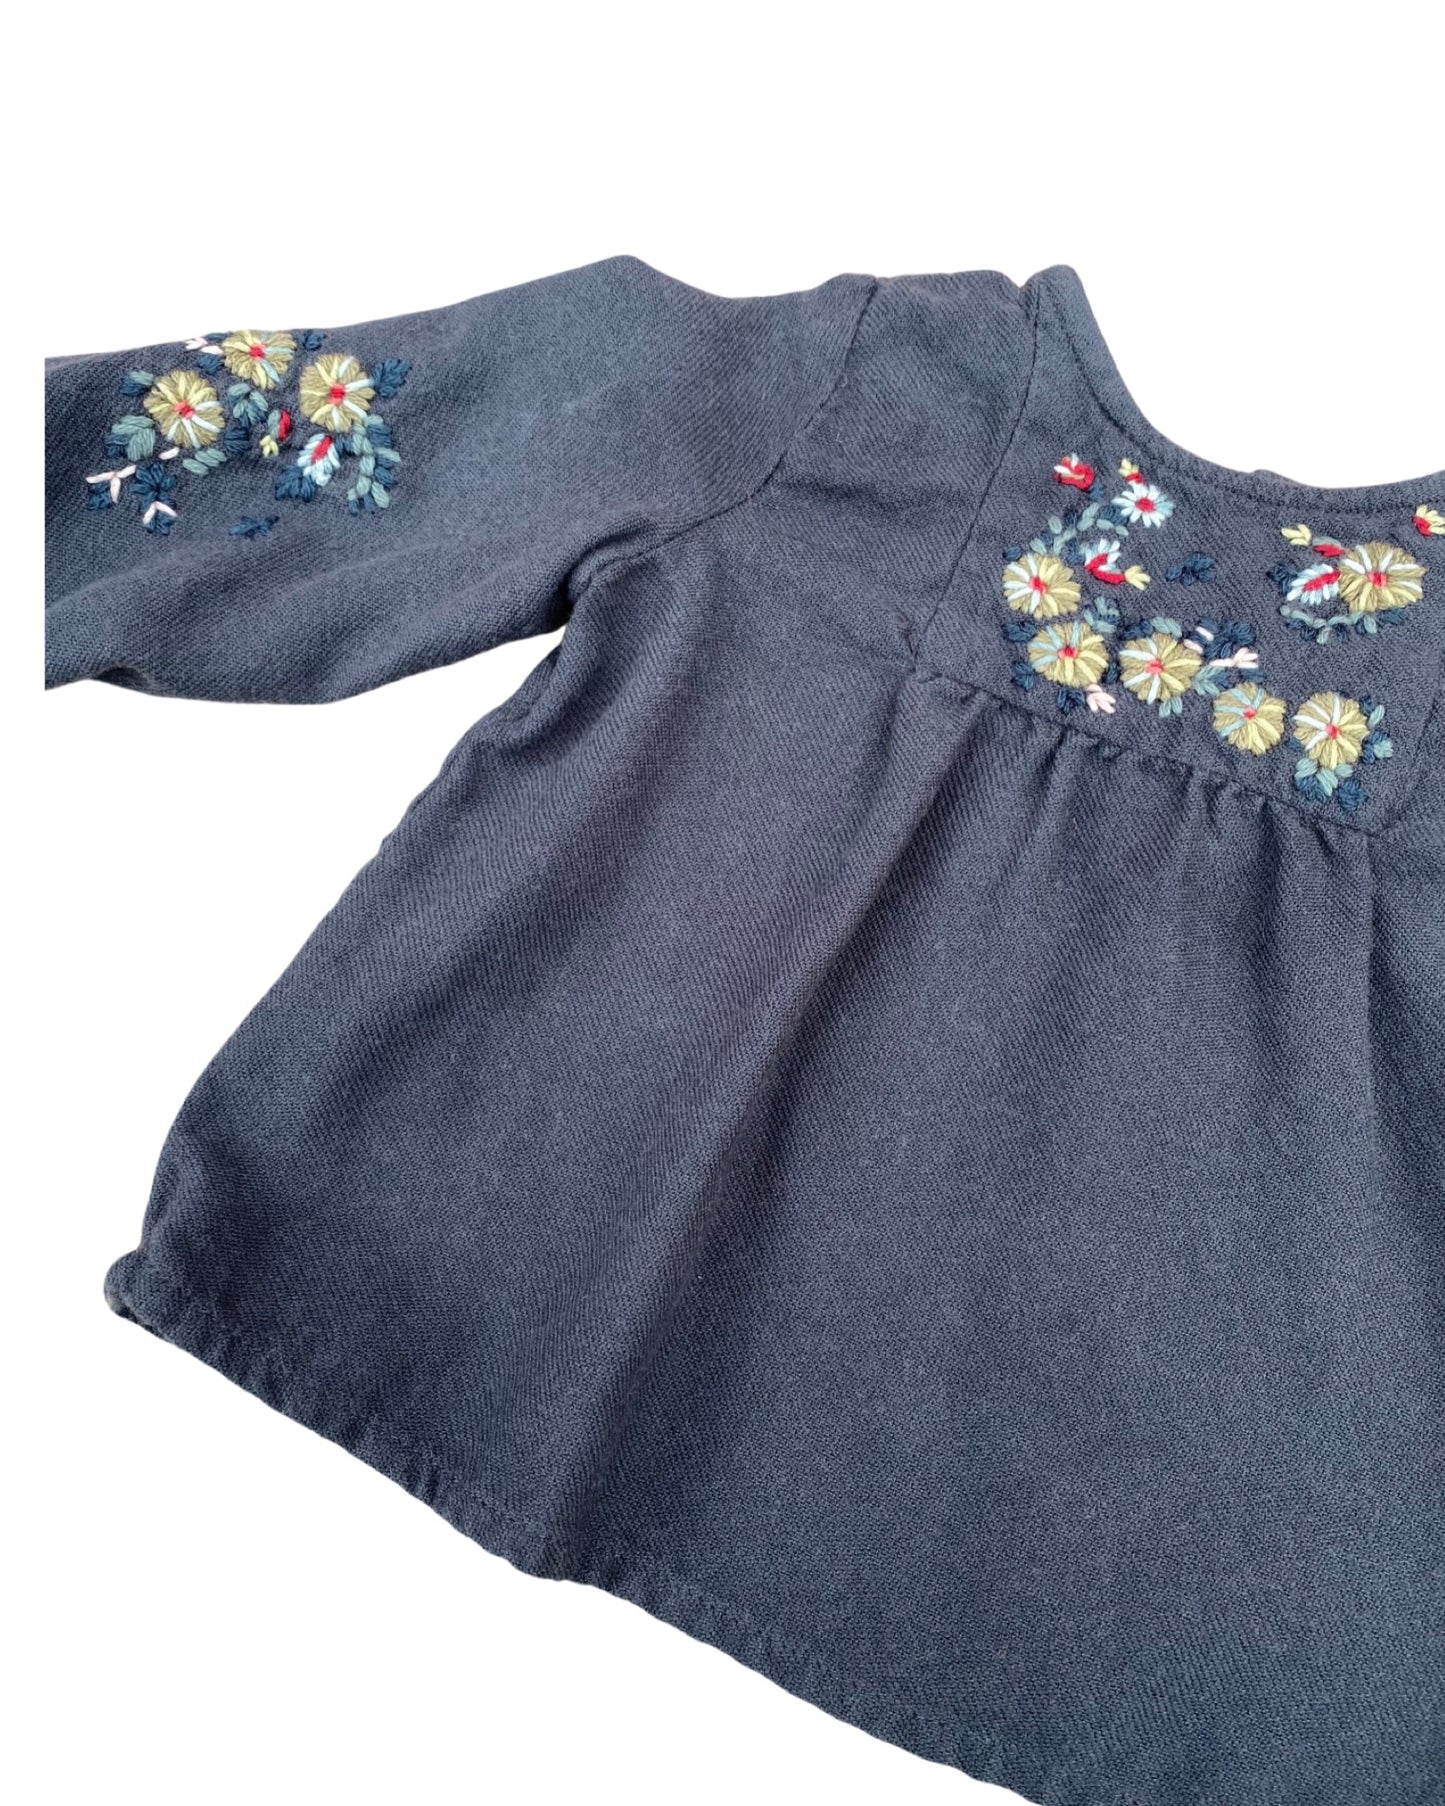 Bonpoint dark grey cotton blouse with floral embroidery (3-6mths)